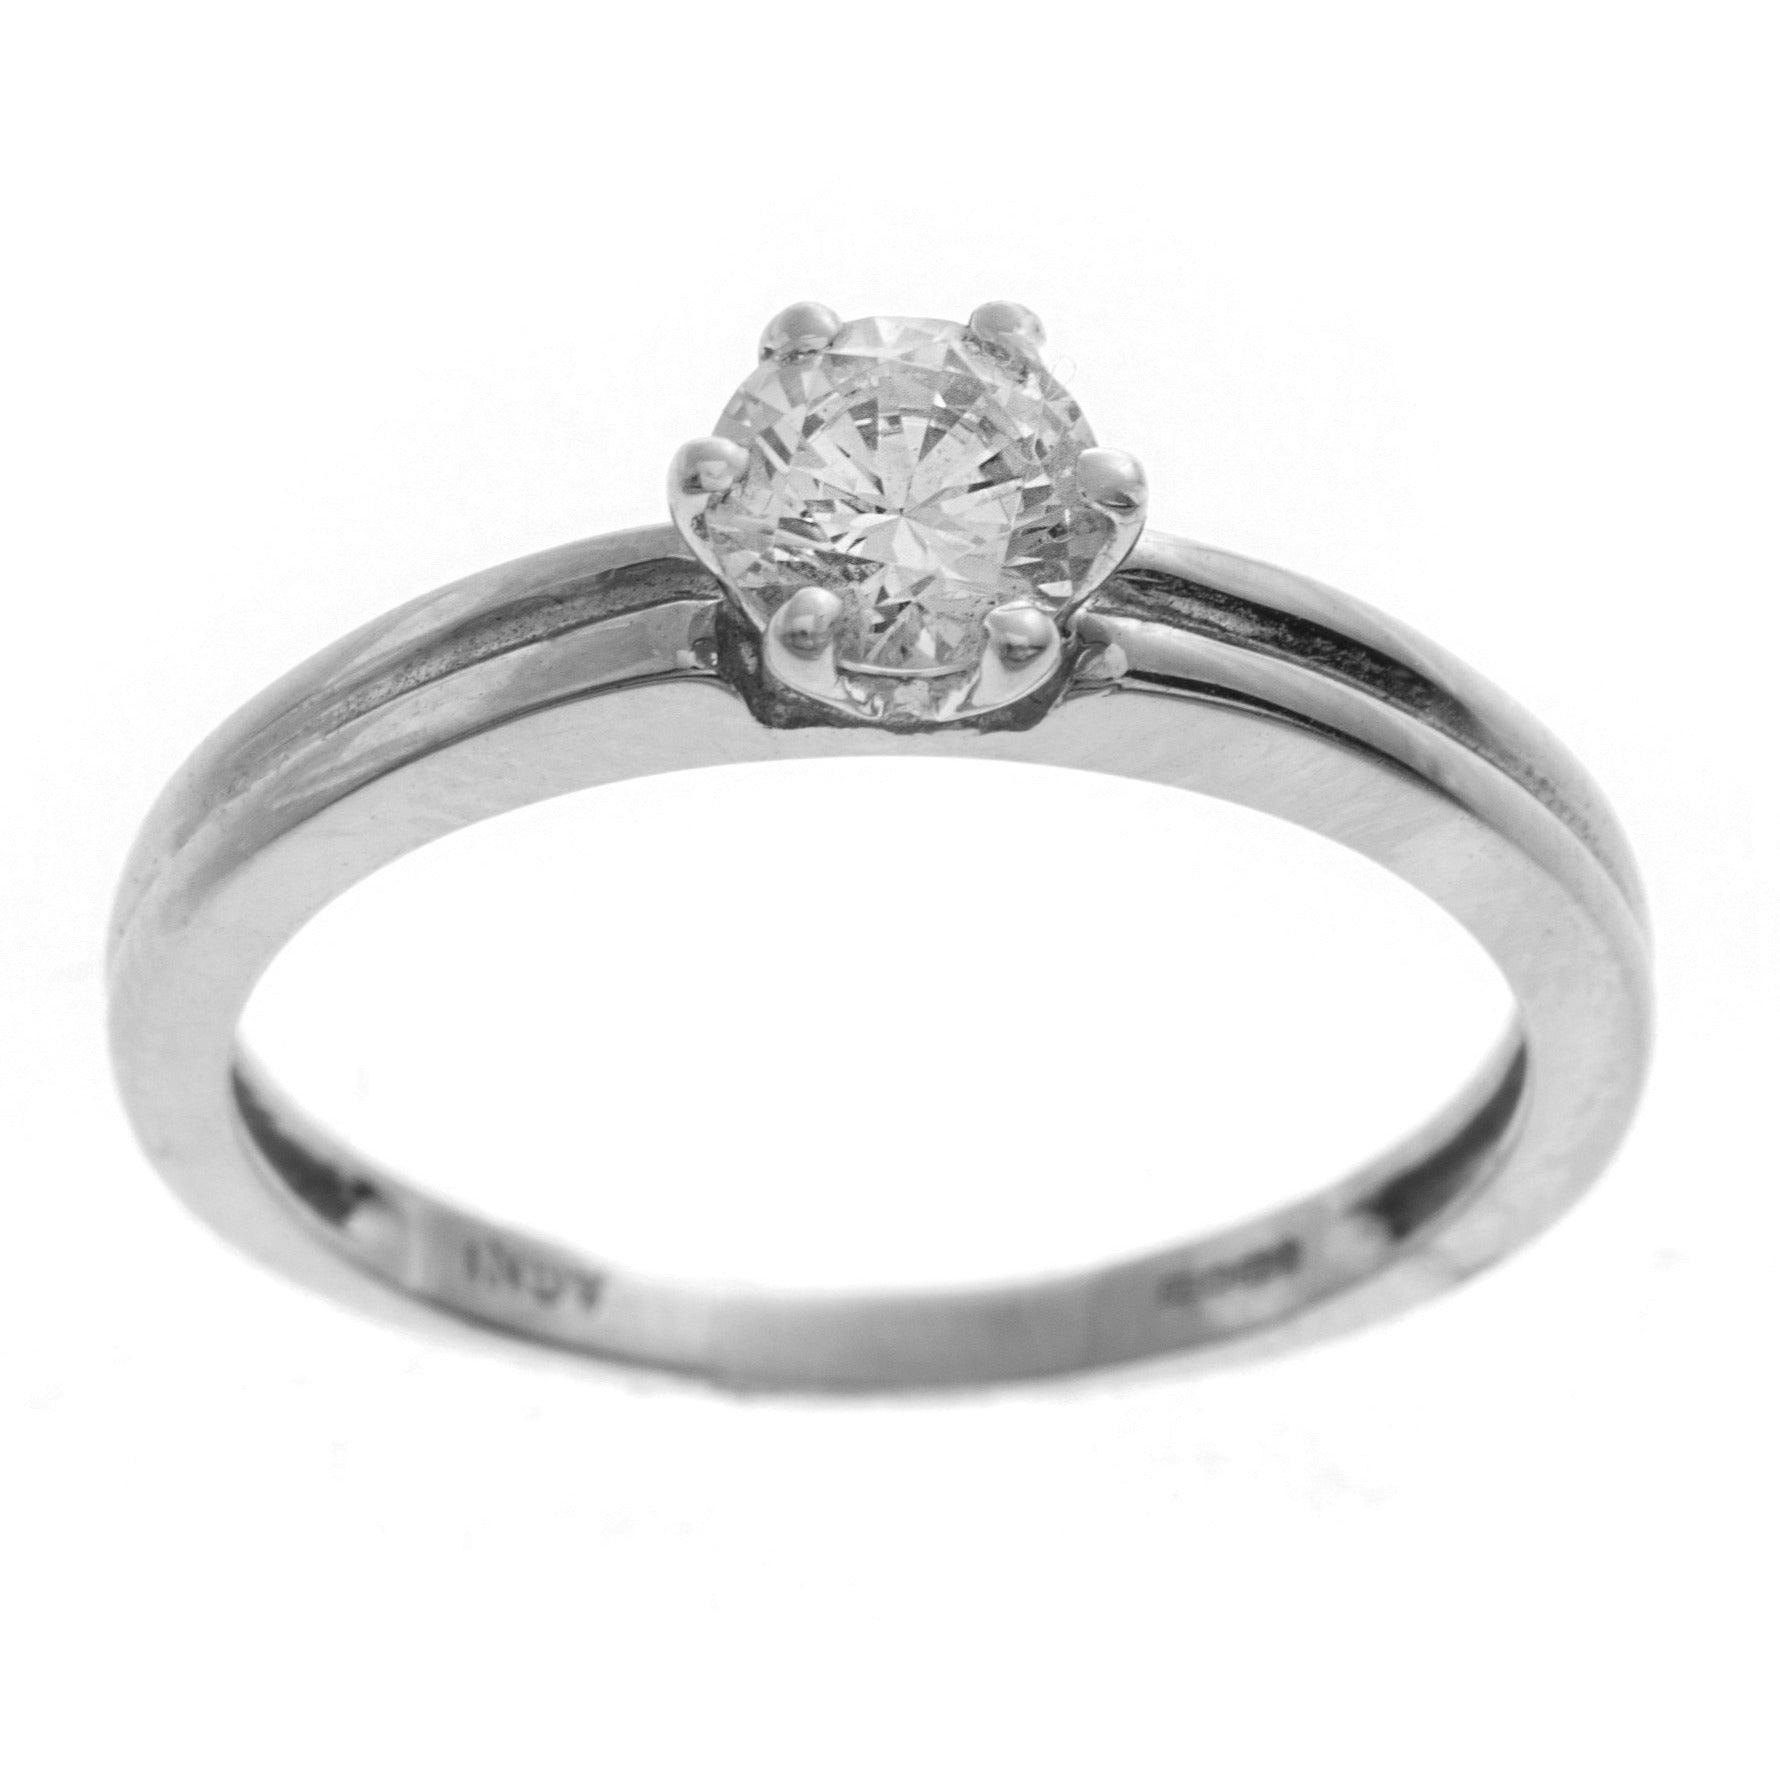 18ct White Gold Cubic Zirconia Engagement Ring LR-2363 - Minar Jewellers